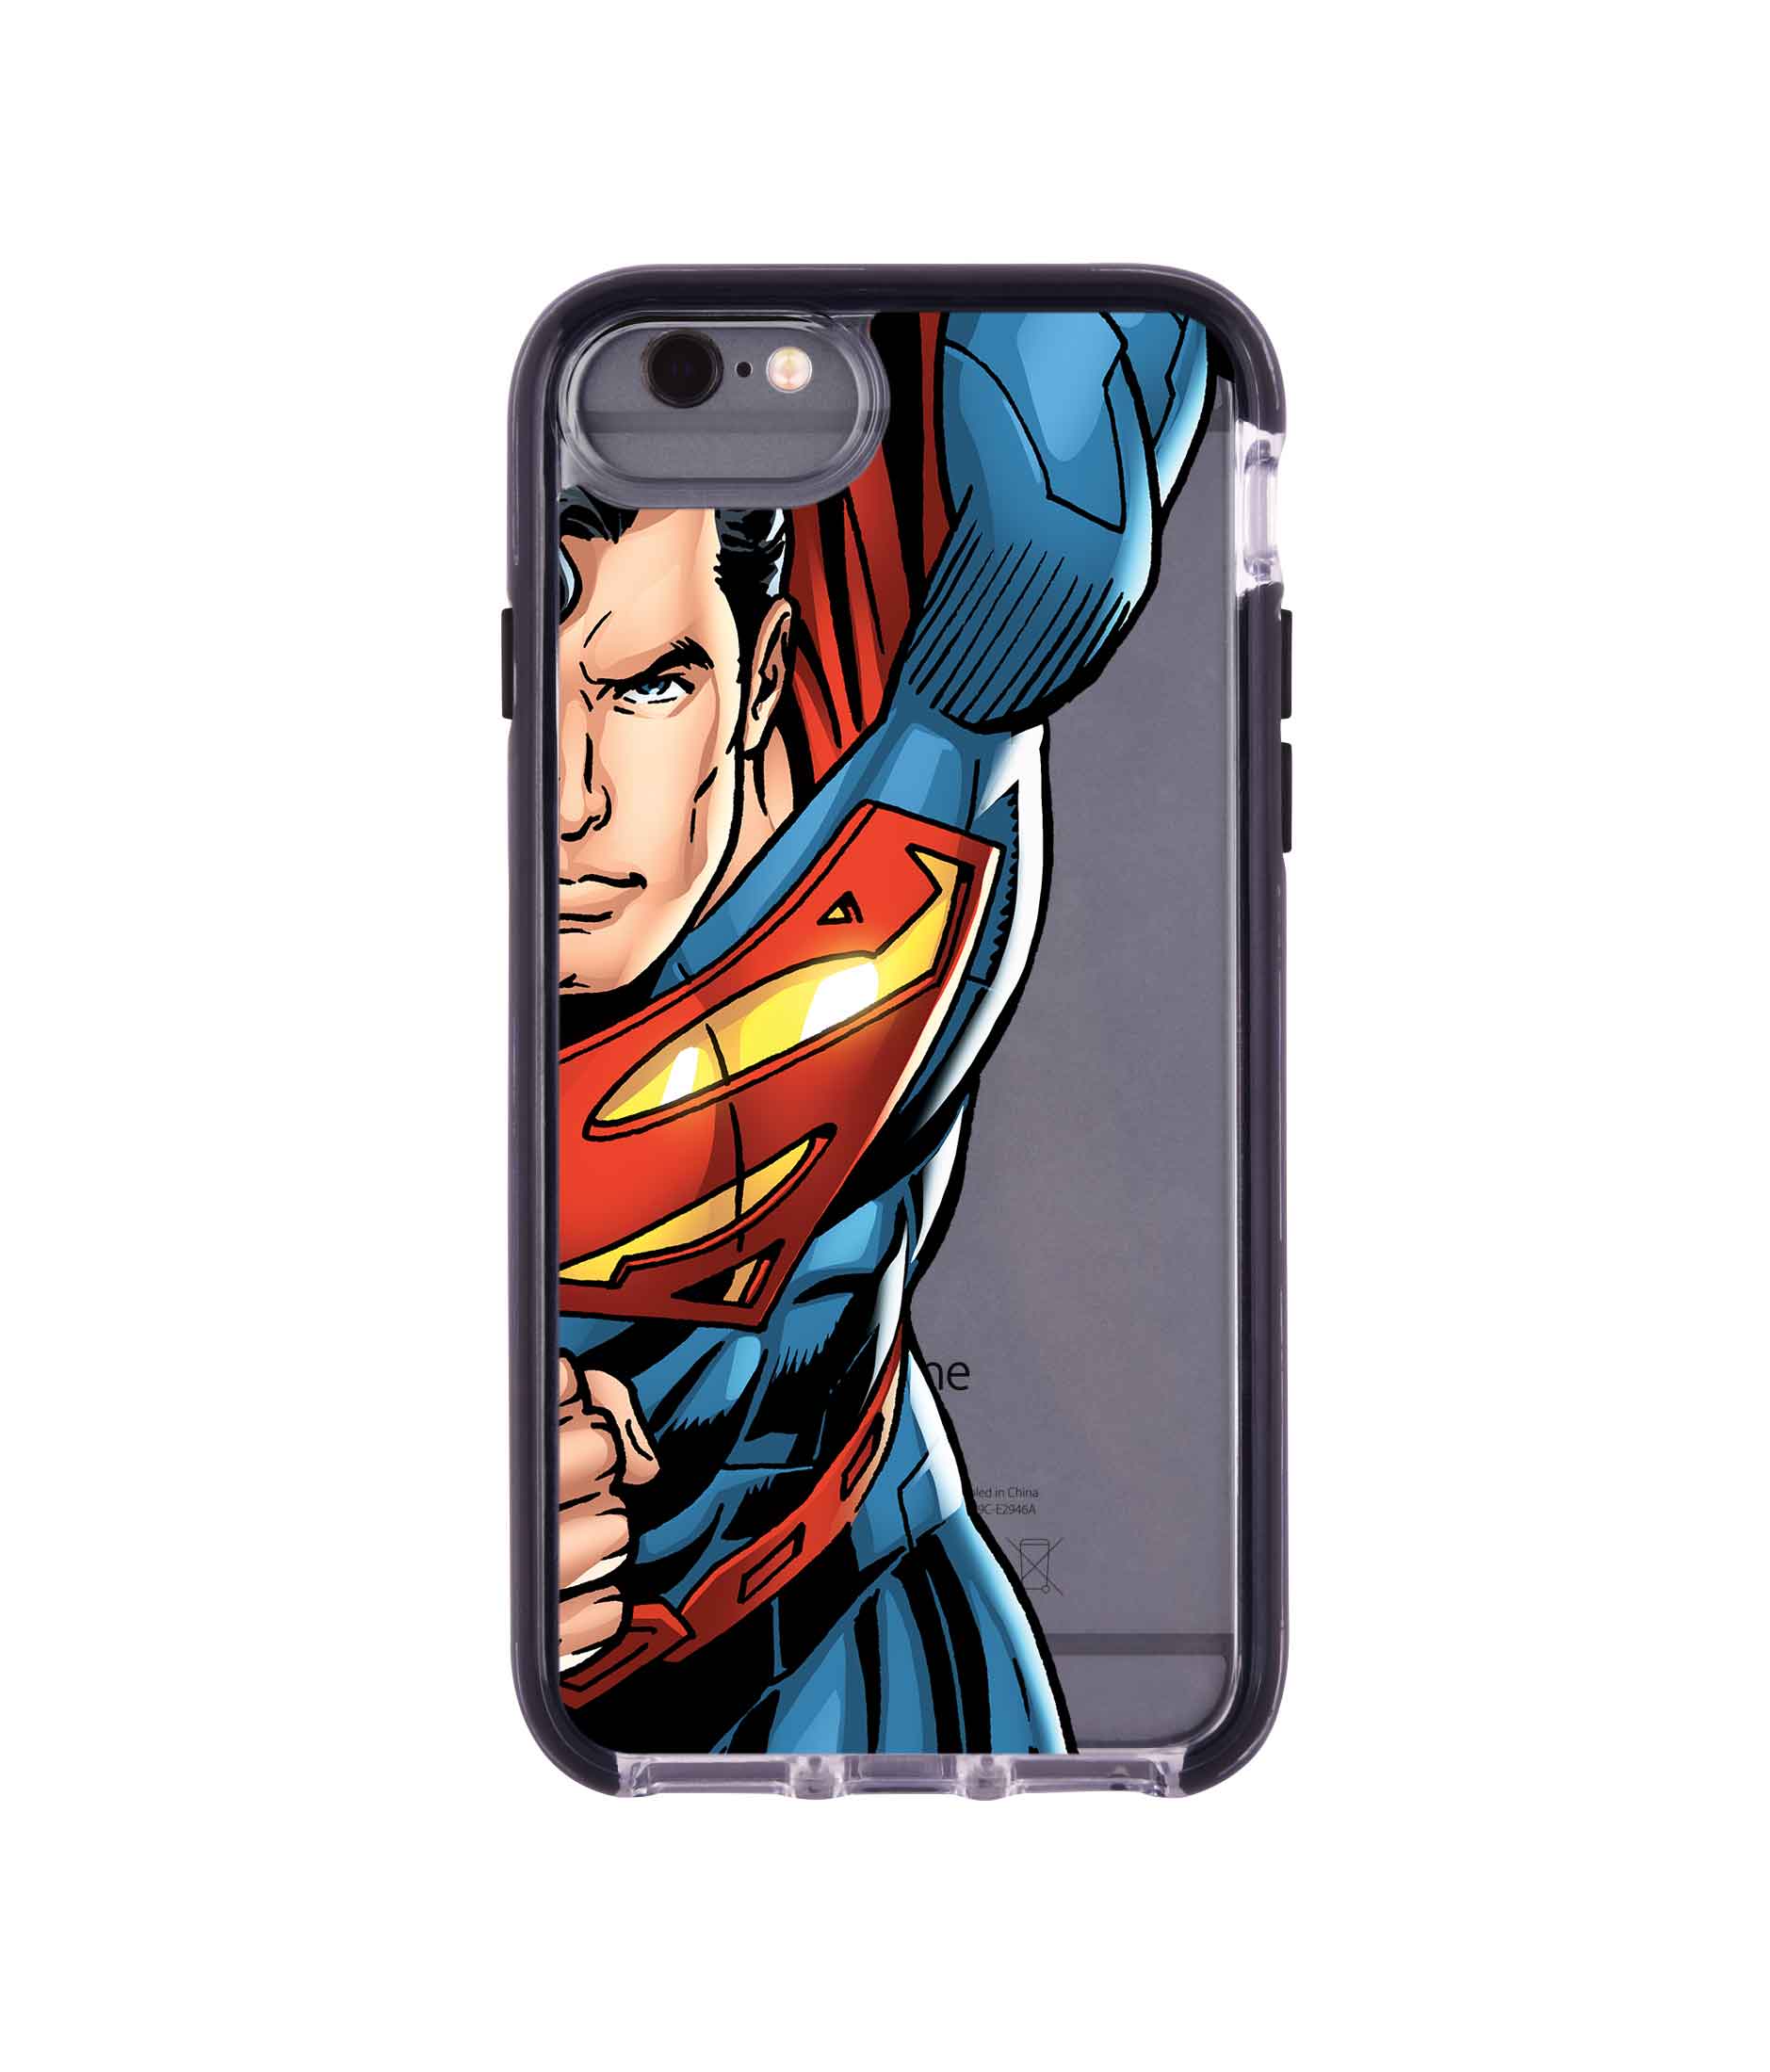 Speed it like Superman - Extreme Phone Case for iPhone 6